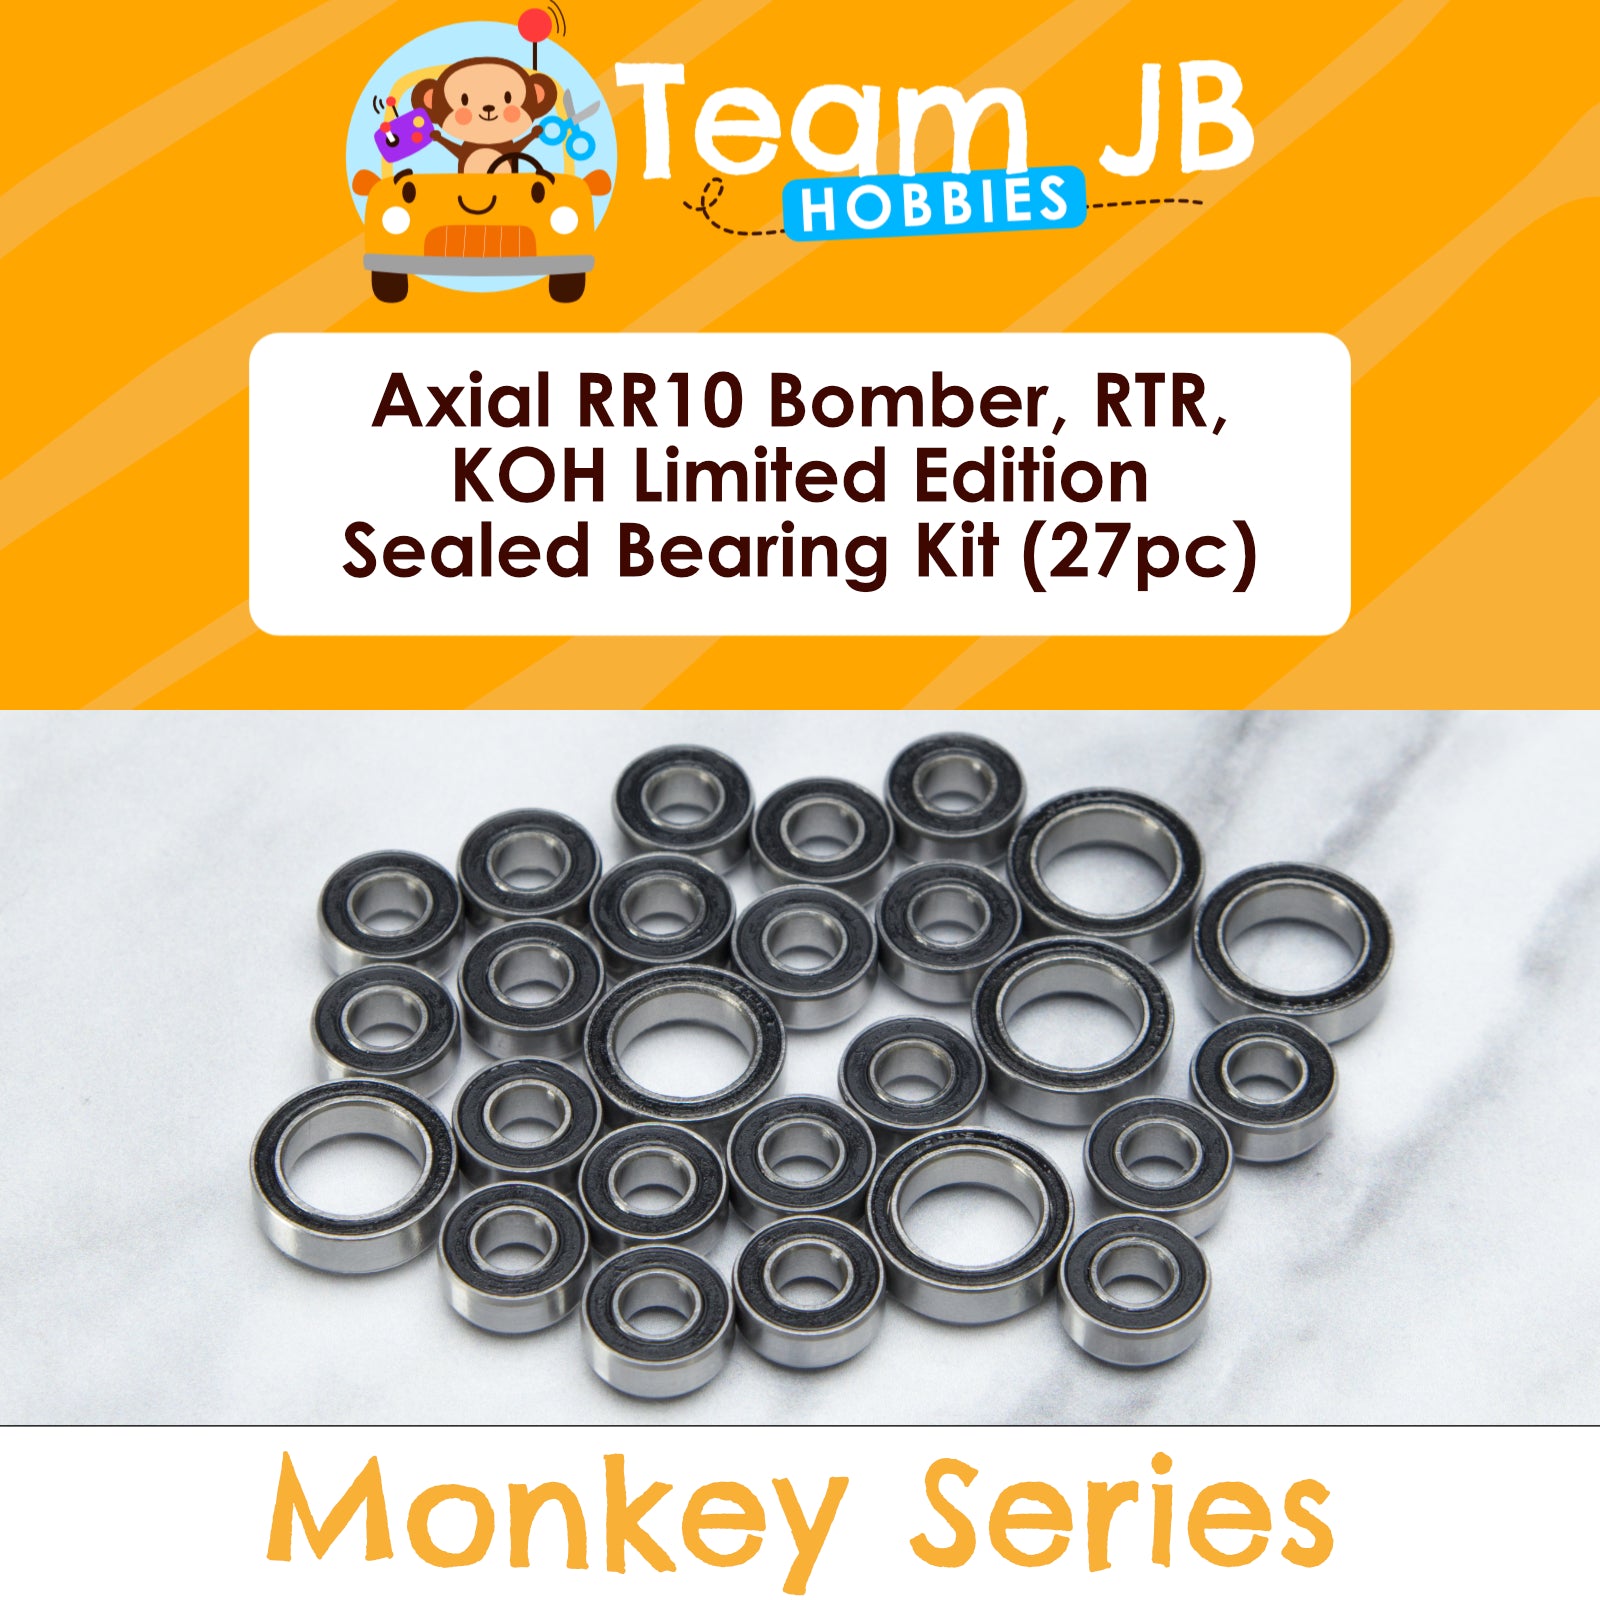 Axial RR10 Bomber, RTR, KOH Limited Edition - Sealed Bearing Kit